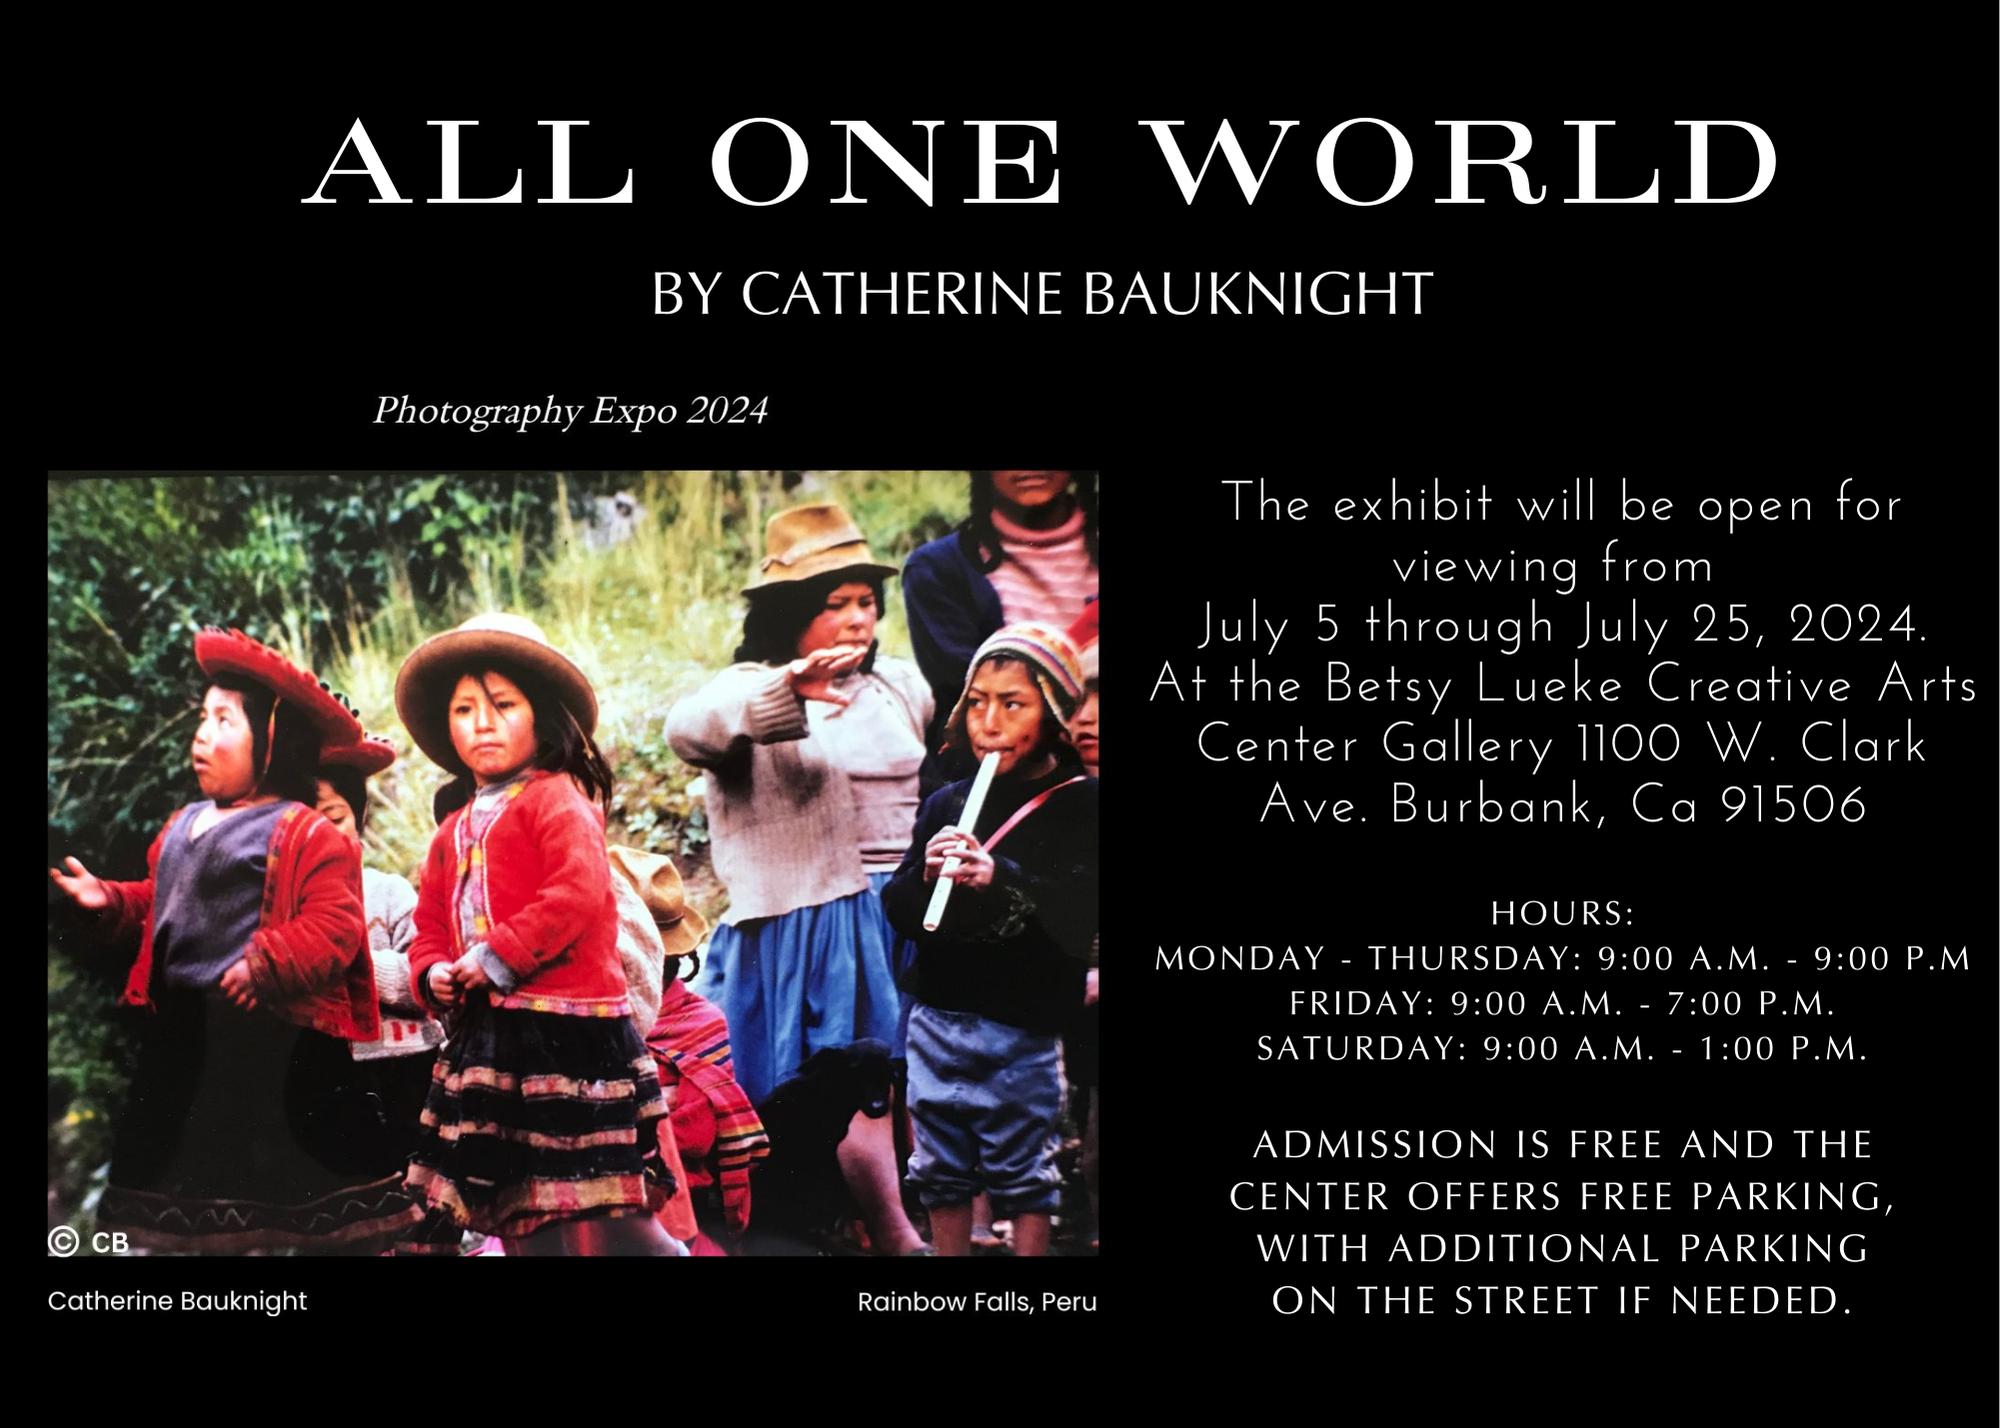 World in Focus: Catherine Bauknight’s Photography Exhibit Premieres with High Praise